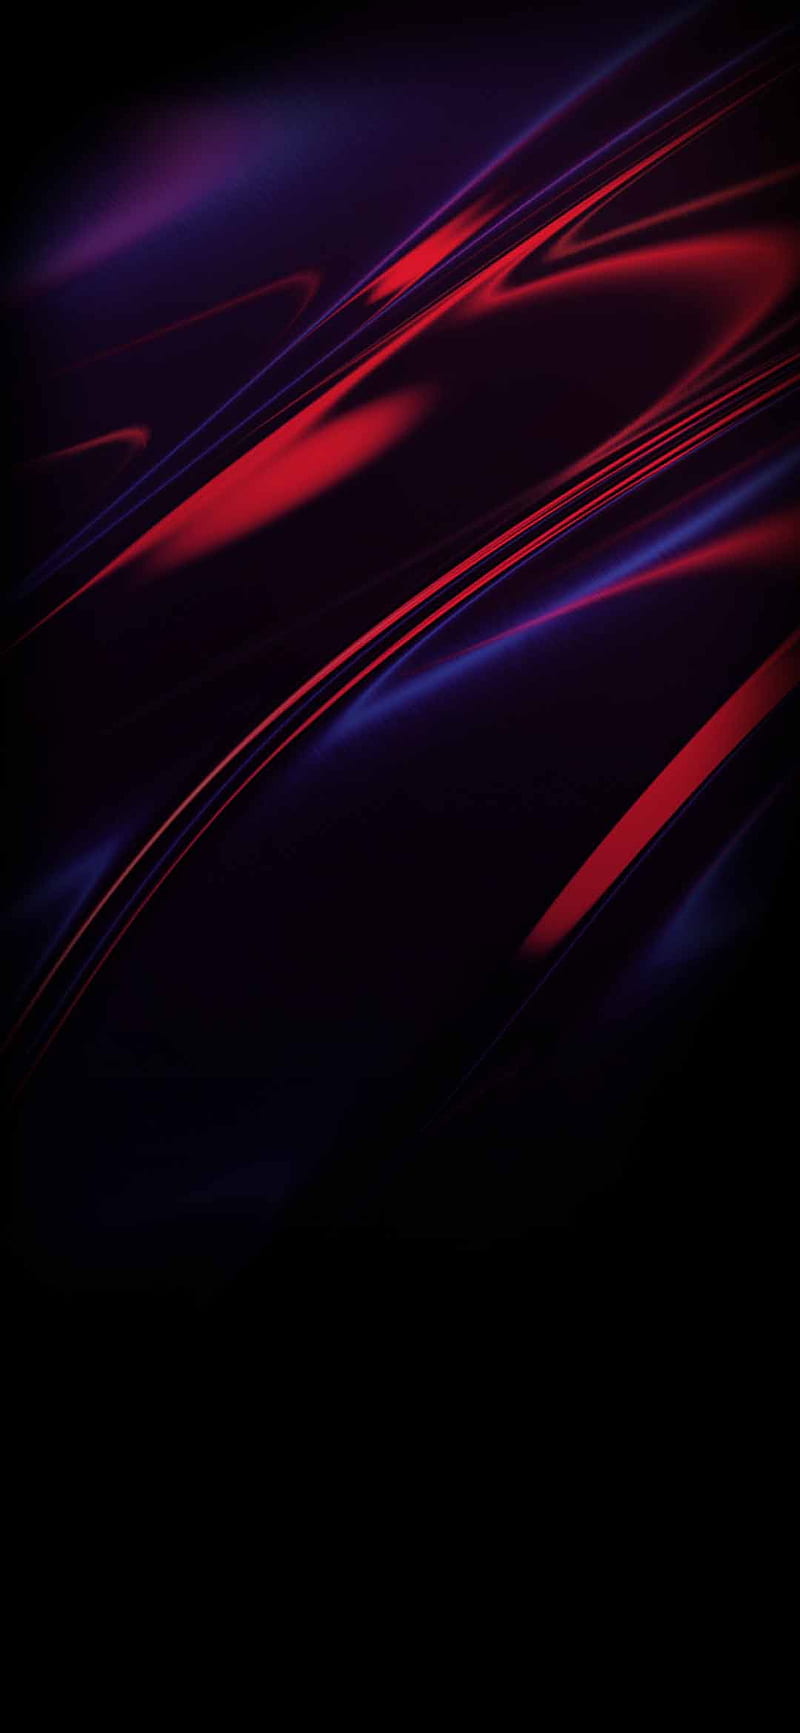 Nubia Red Magic 3 Wallpapers (FHD+) - Download - DroidViews